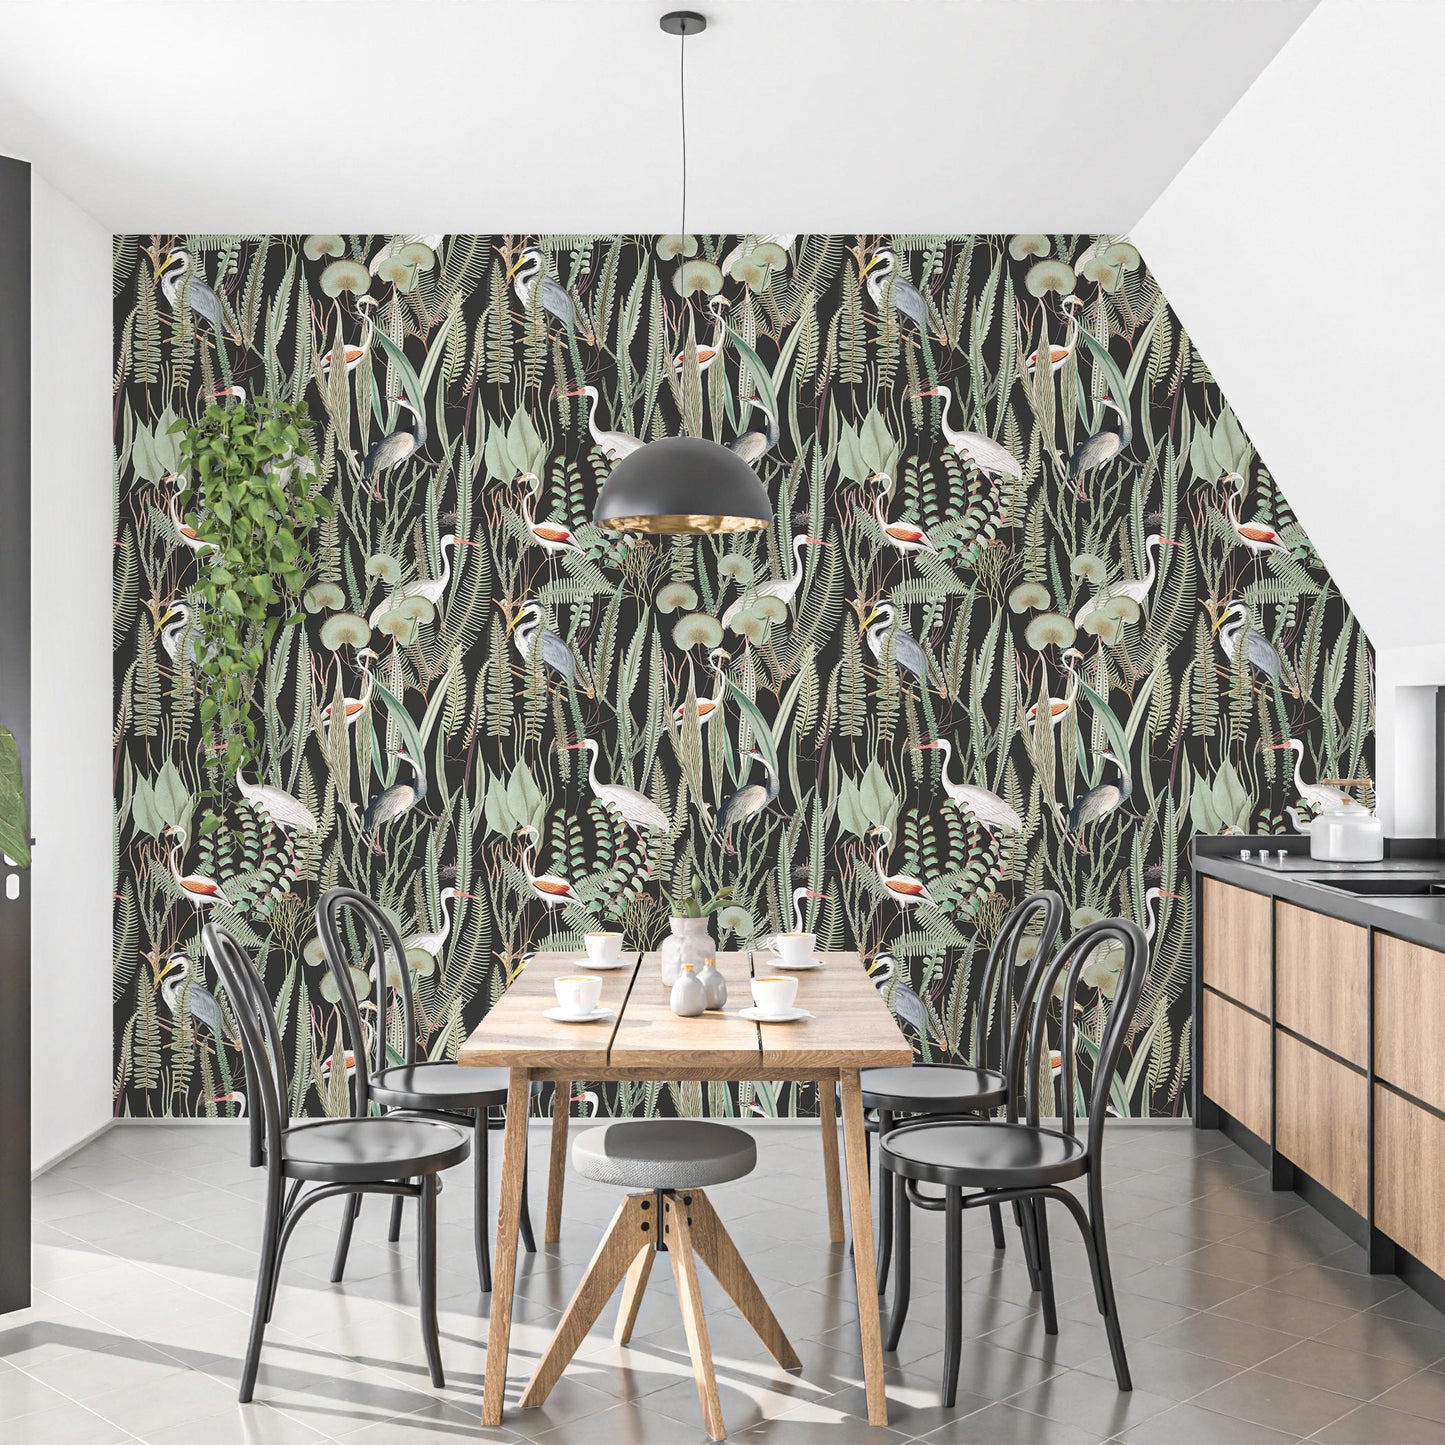 Enrich your kitchen with a touch of natural beauty and sophistication with our black background heron and botanical wallpaper. The rich black backdrop complements the sleek wooden cabinets and black accents, creating a modern and inviting ambiance. The intricate floral patterns and majestic herons add a touch of organic charm, transforming your kitchen into a visually captivating space.